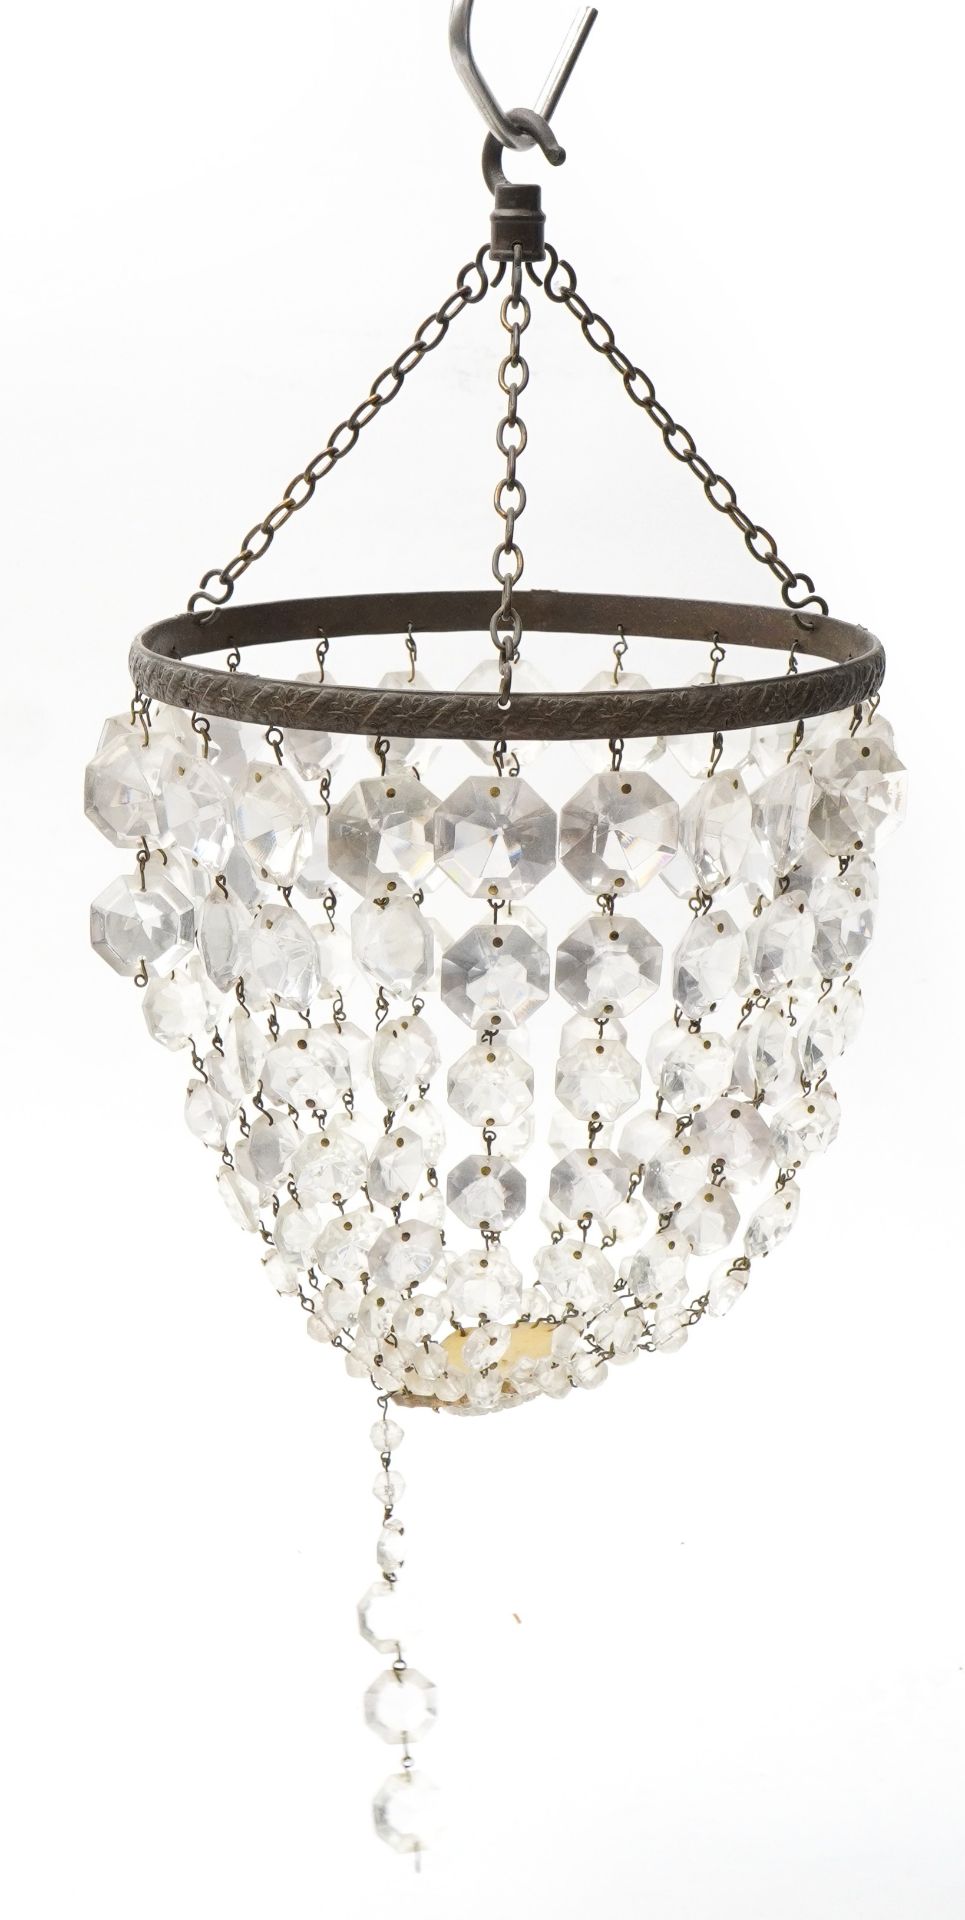 Two brass bag chandeliers with cut glass drops, the largest 26cm in diameter : For further - Image 5 of 6